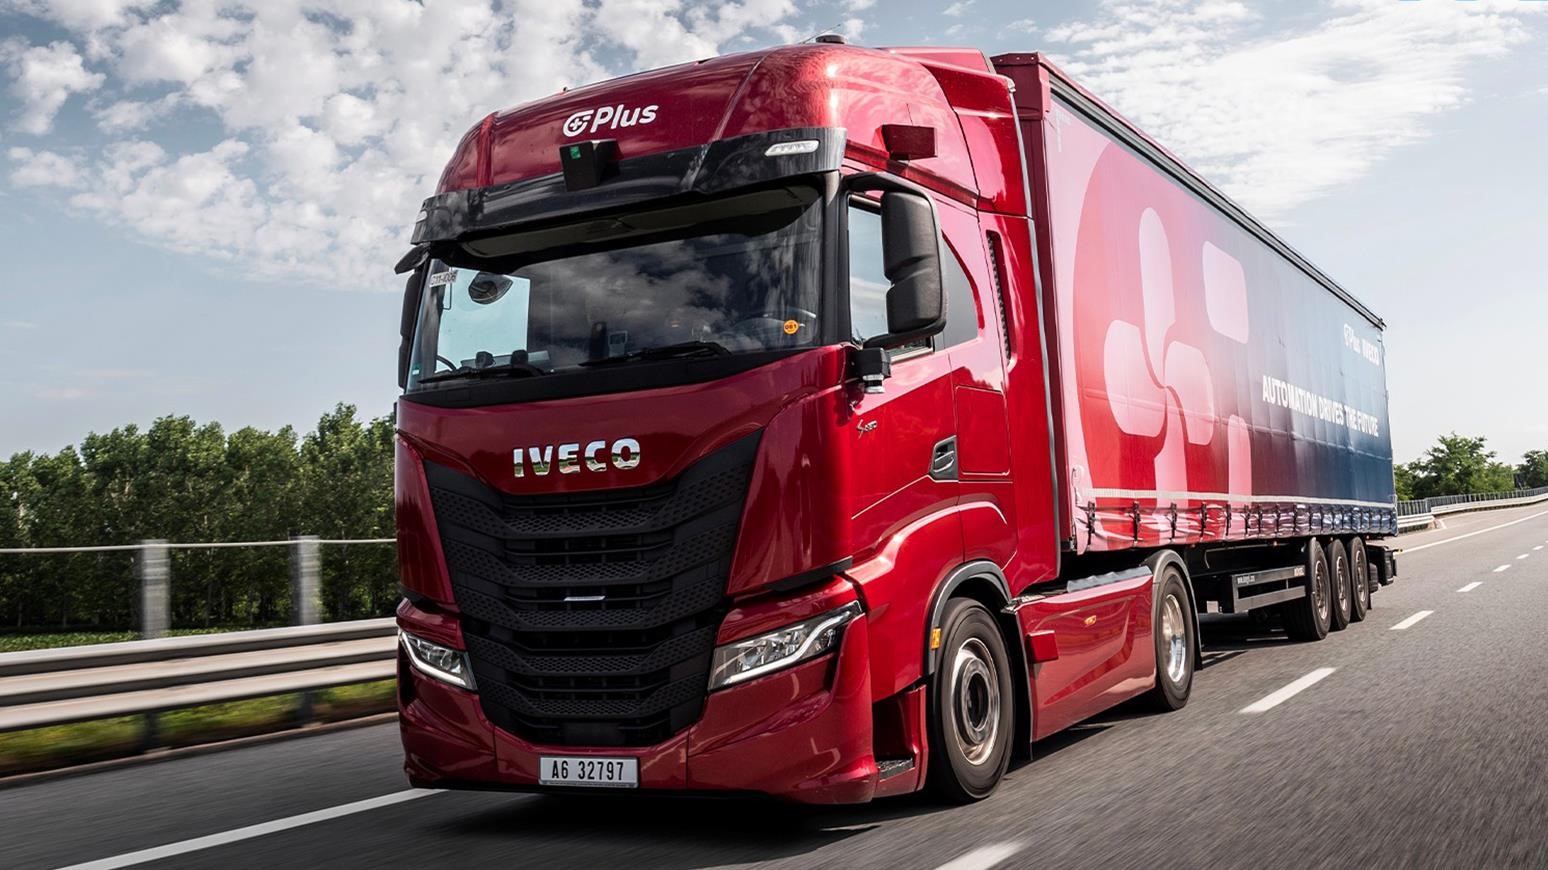 Iveco & Plus Start Public Road Testing Of Their Highly Automated Truck In Germany